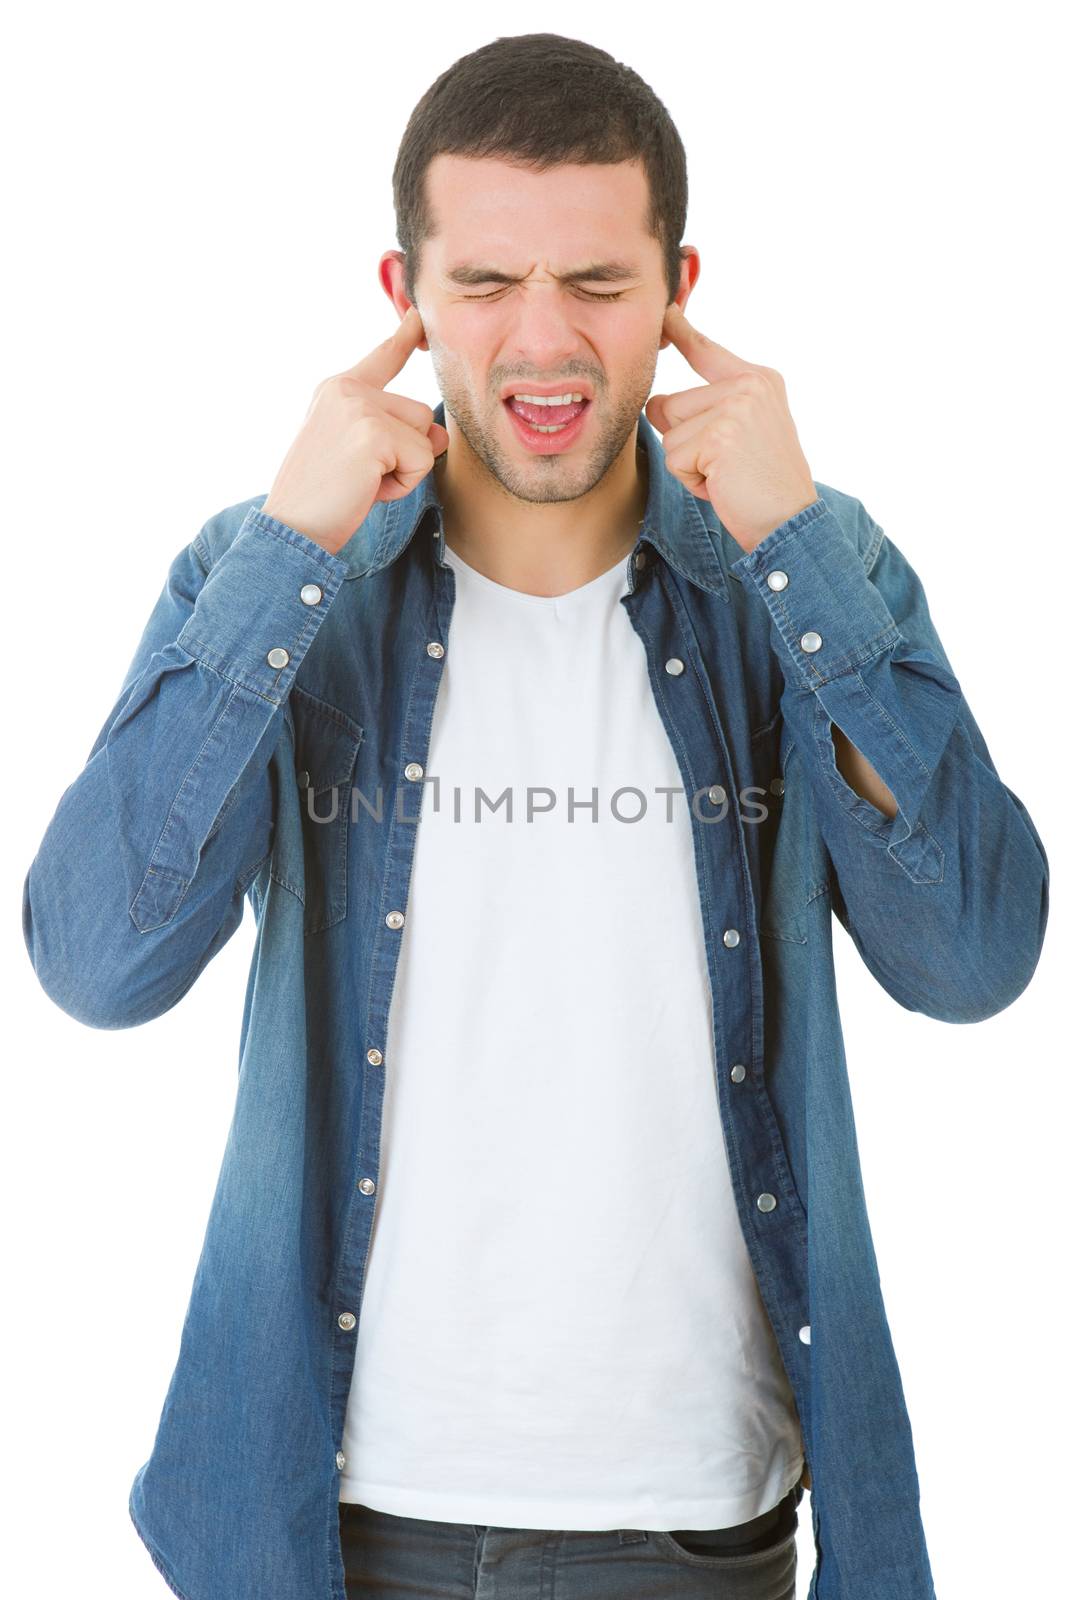 handsome young man covering his ears, isolated white background